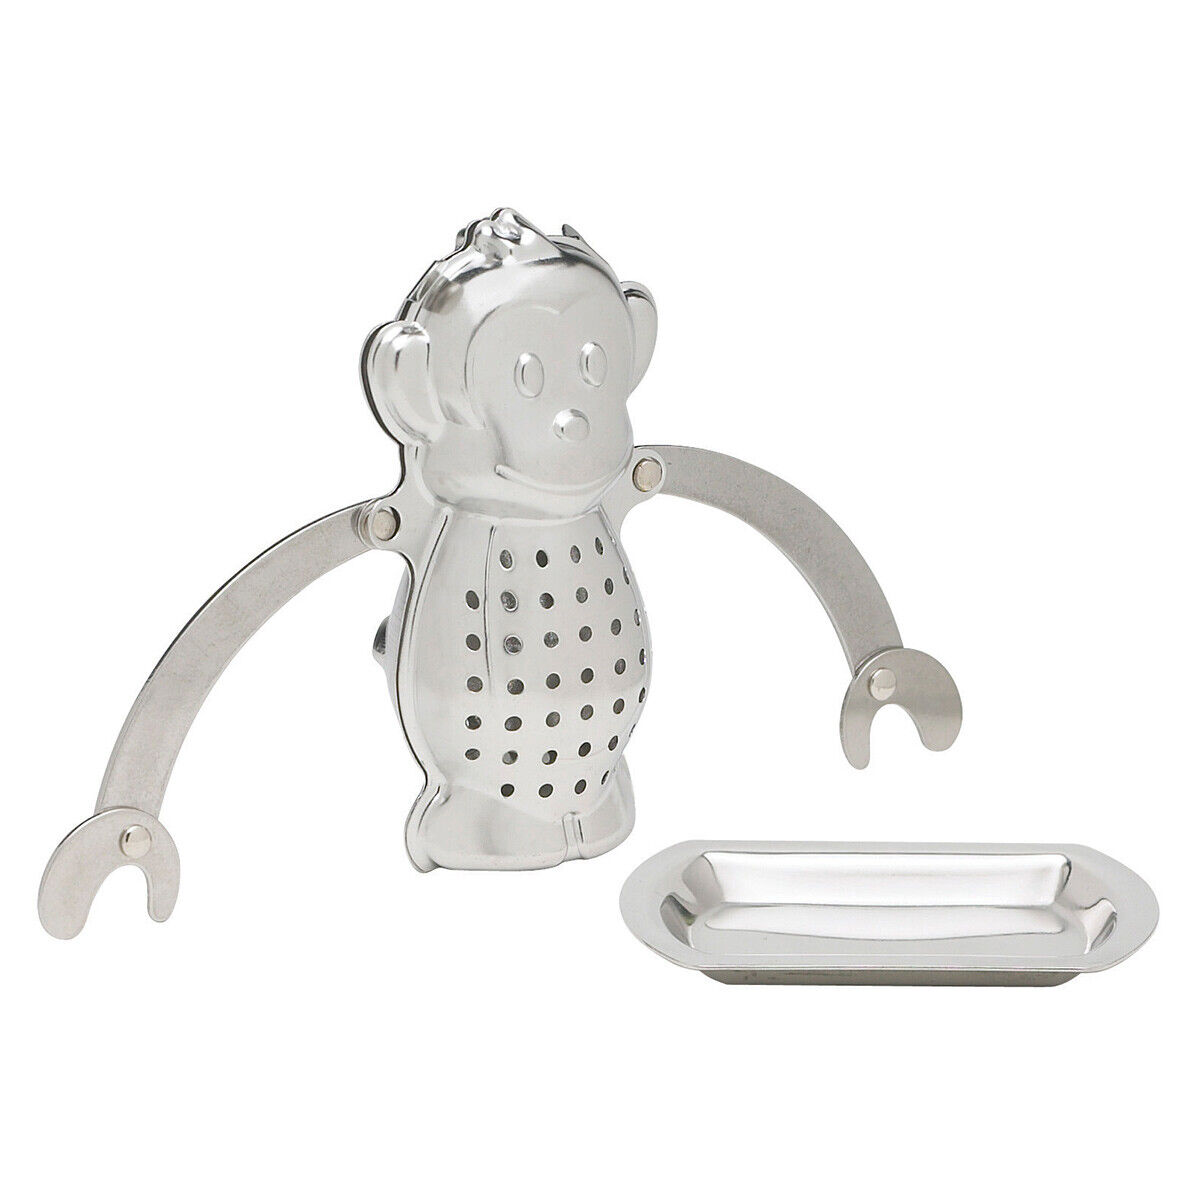 Monkey Tea Infuser with Drip Tray fits any size cup